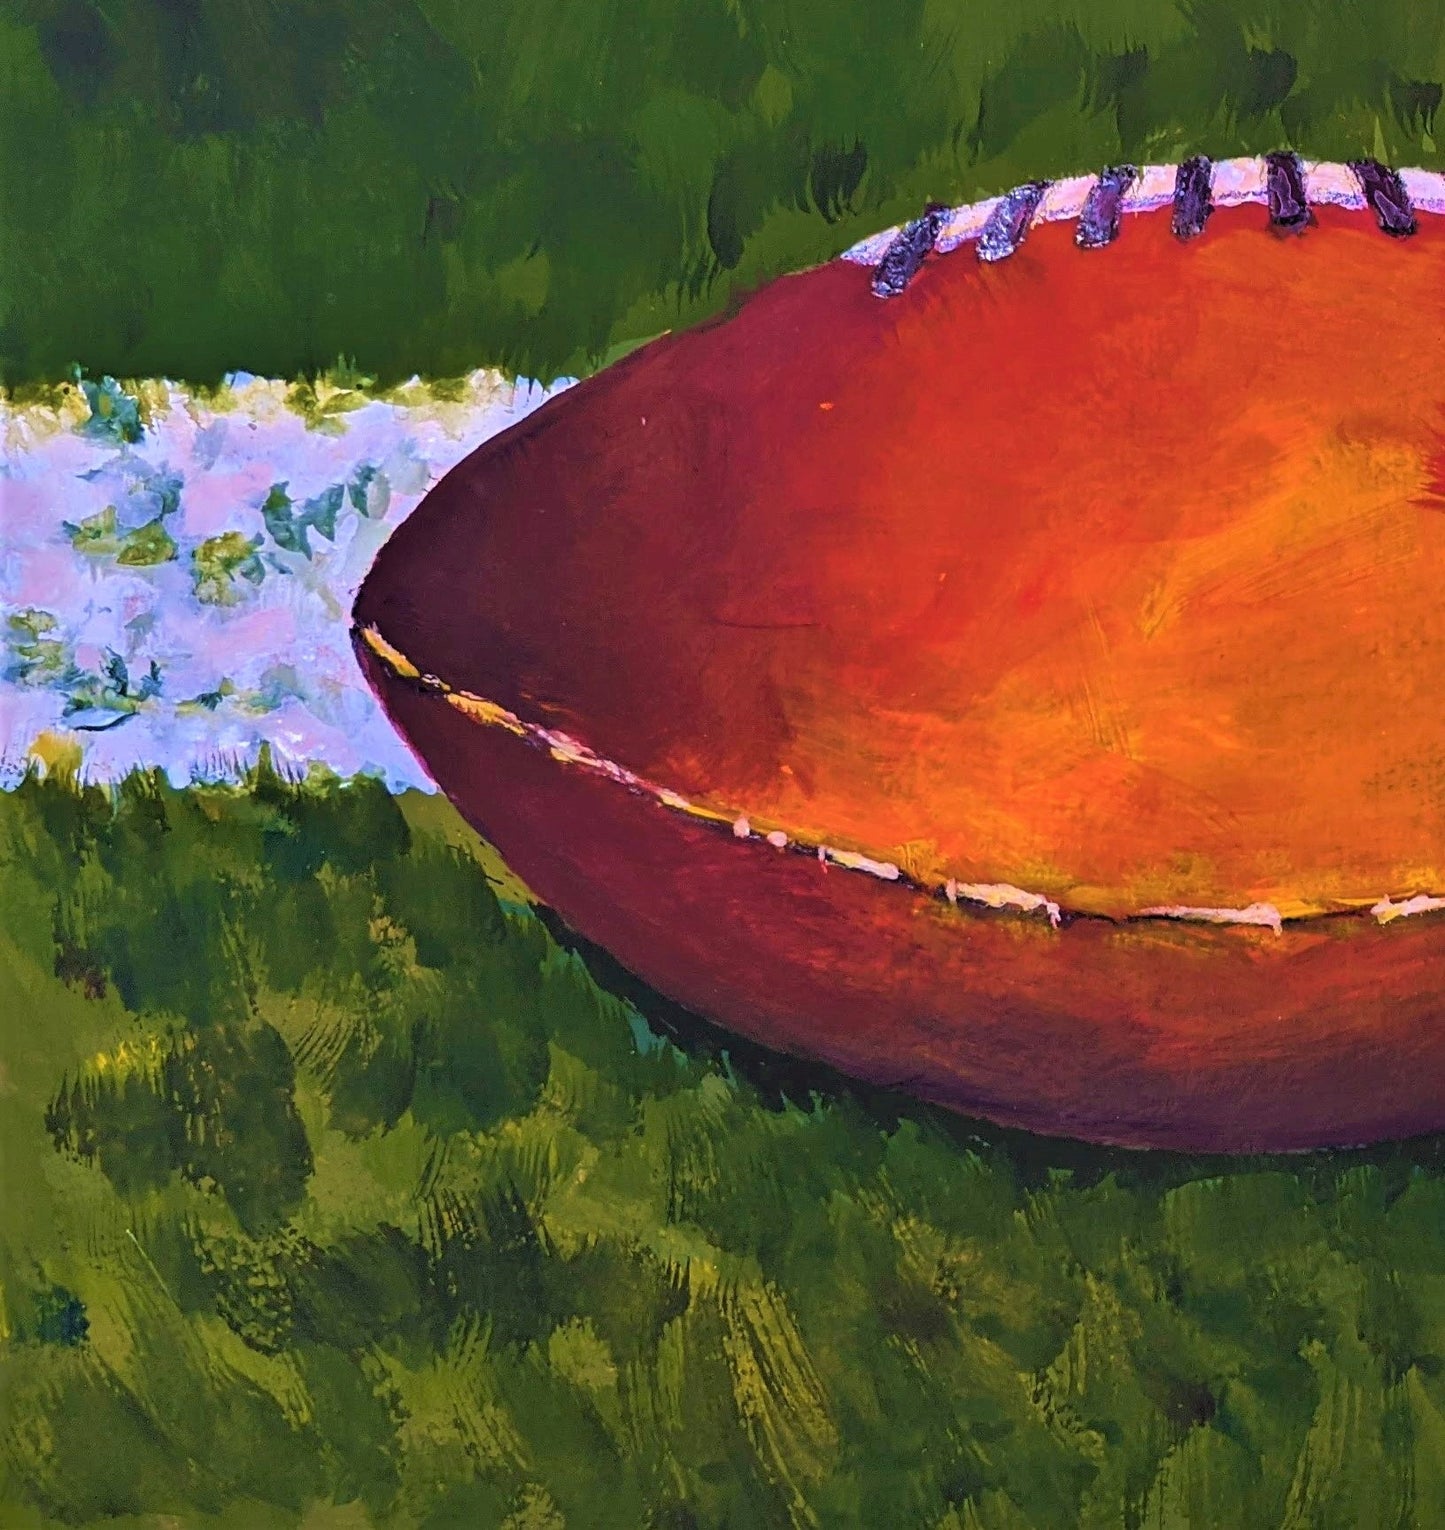 Hike Football acrylic painting on paper detail